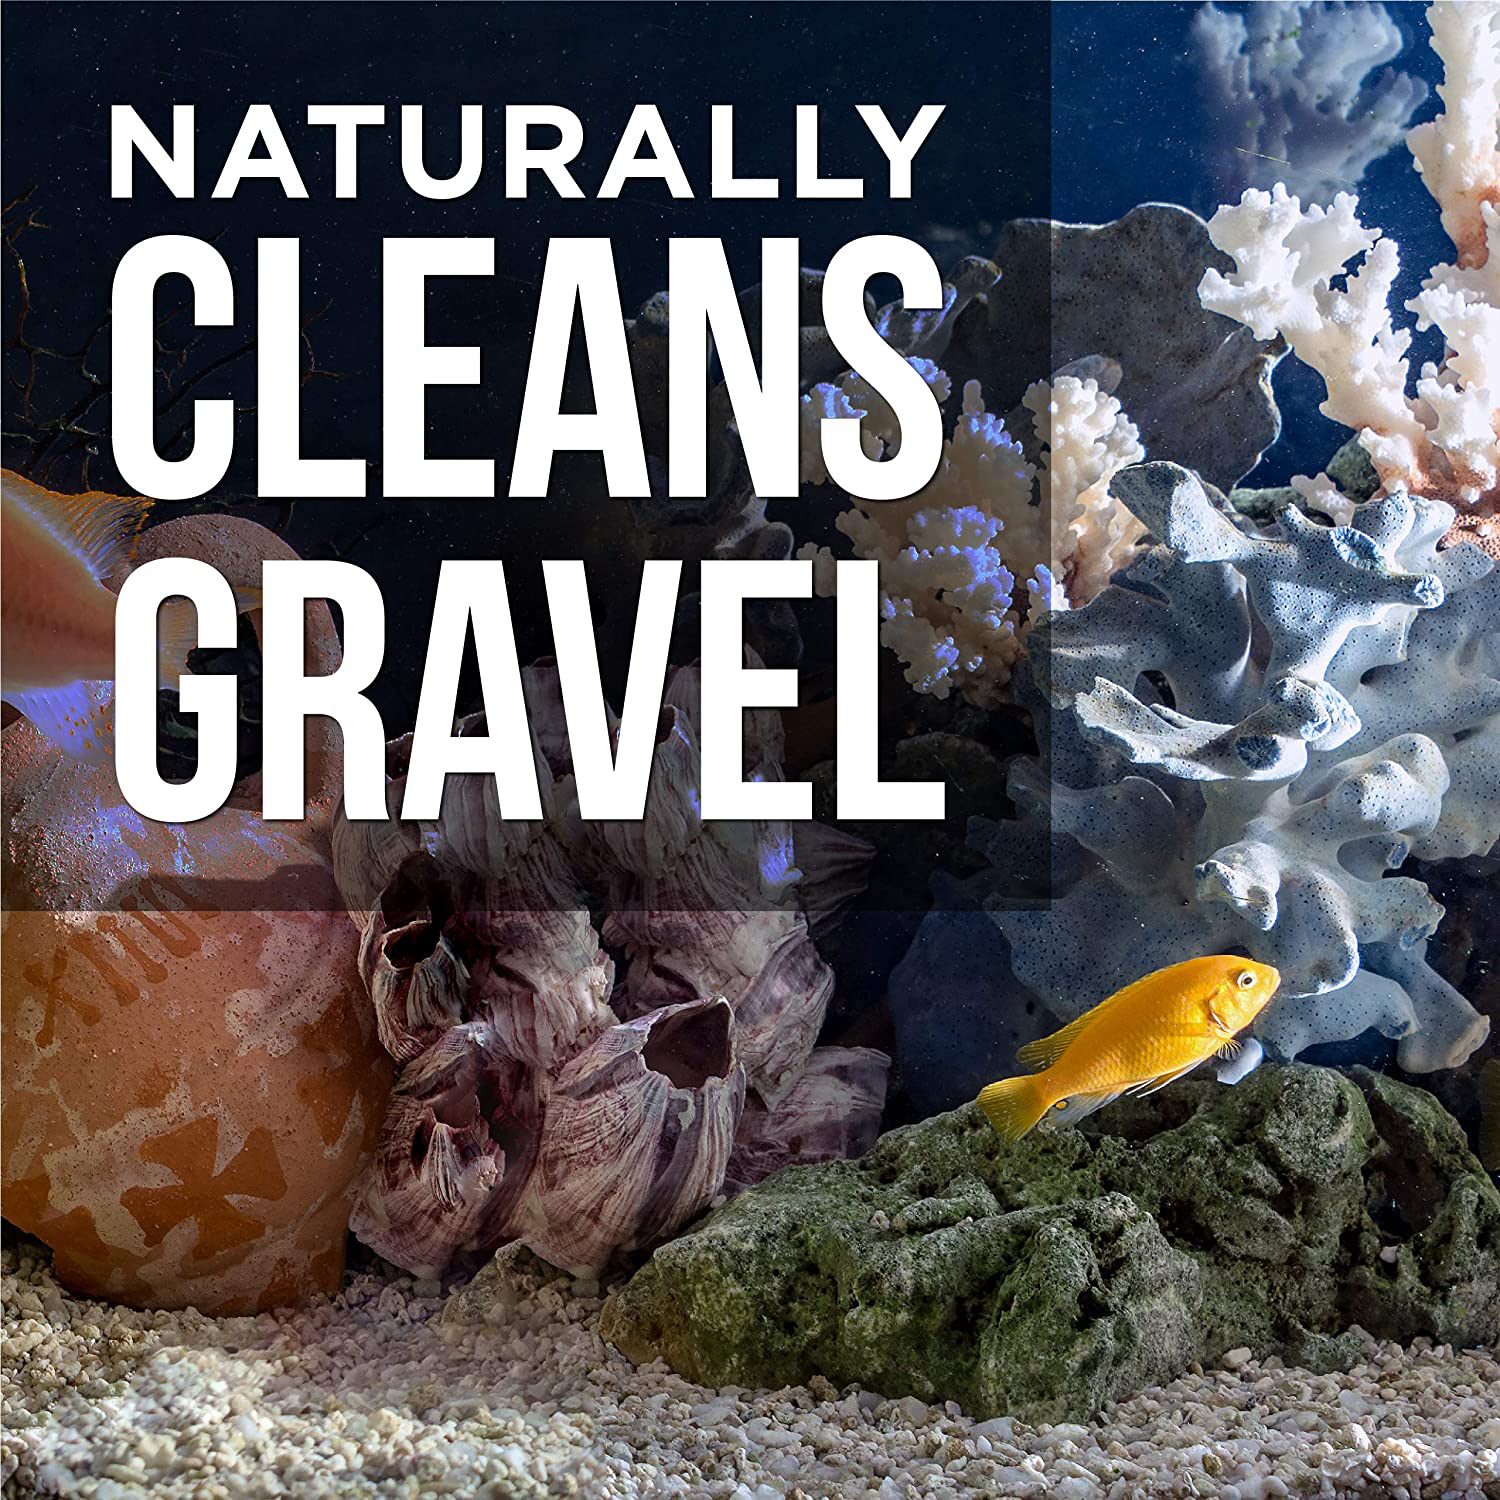 Natural Rapport Aquarium Gravel Cleaner - the Only Gravel Cleaner Fish Need - Professional Aquarium Gravel Cleaner to Naturally Maintain a Healthier Tank, Reducing Fish Waste and Toxins (16 Fl Oz)